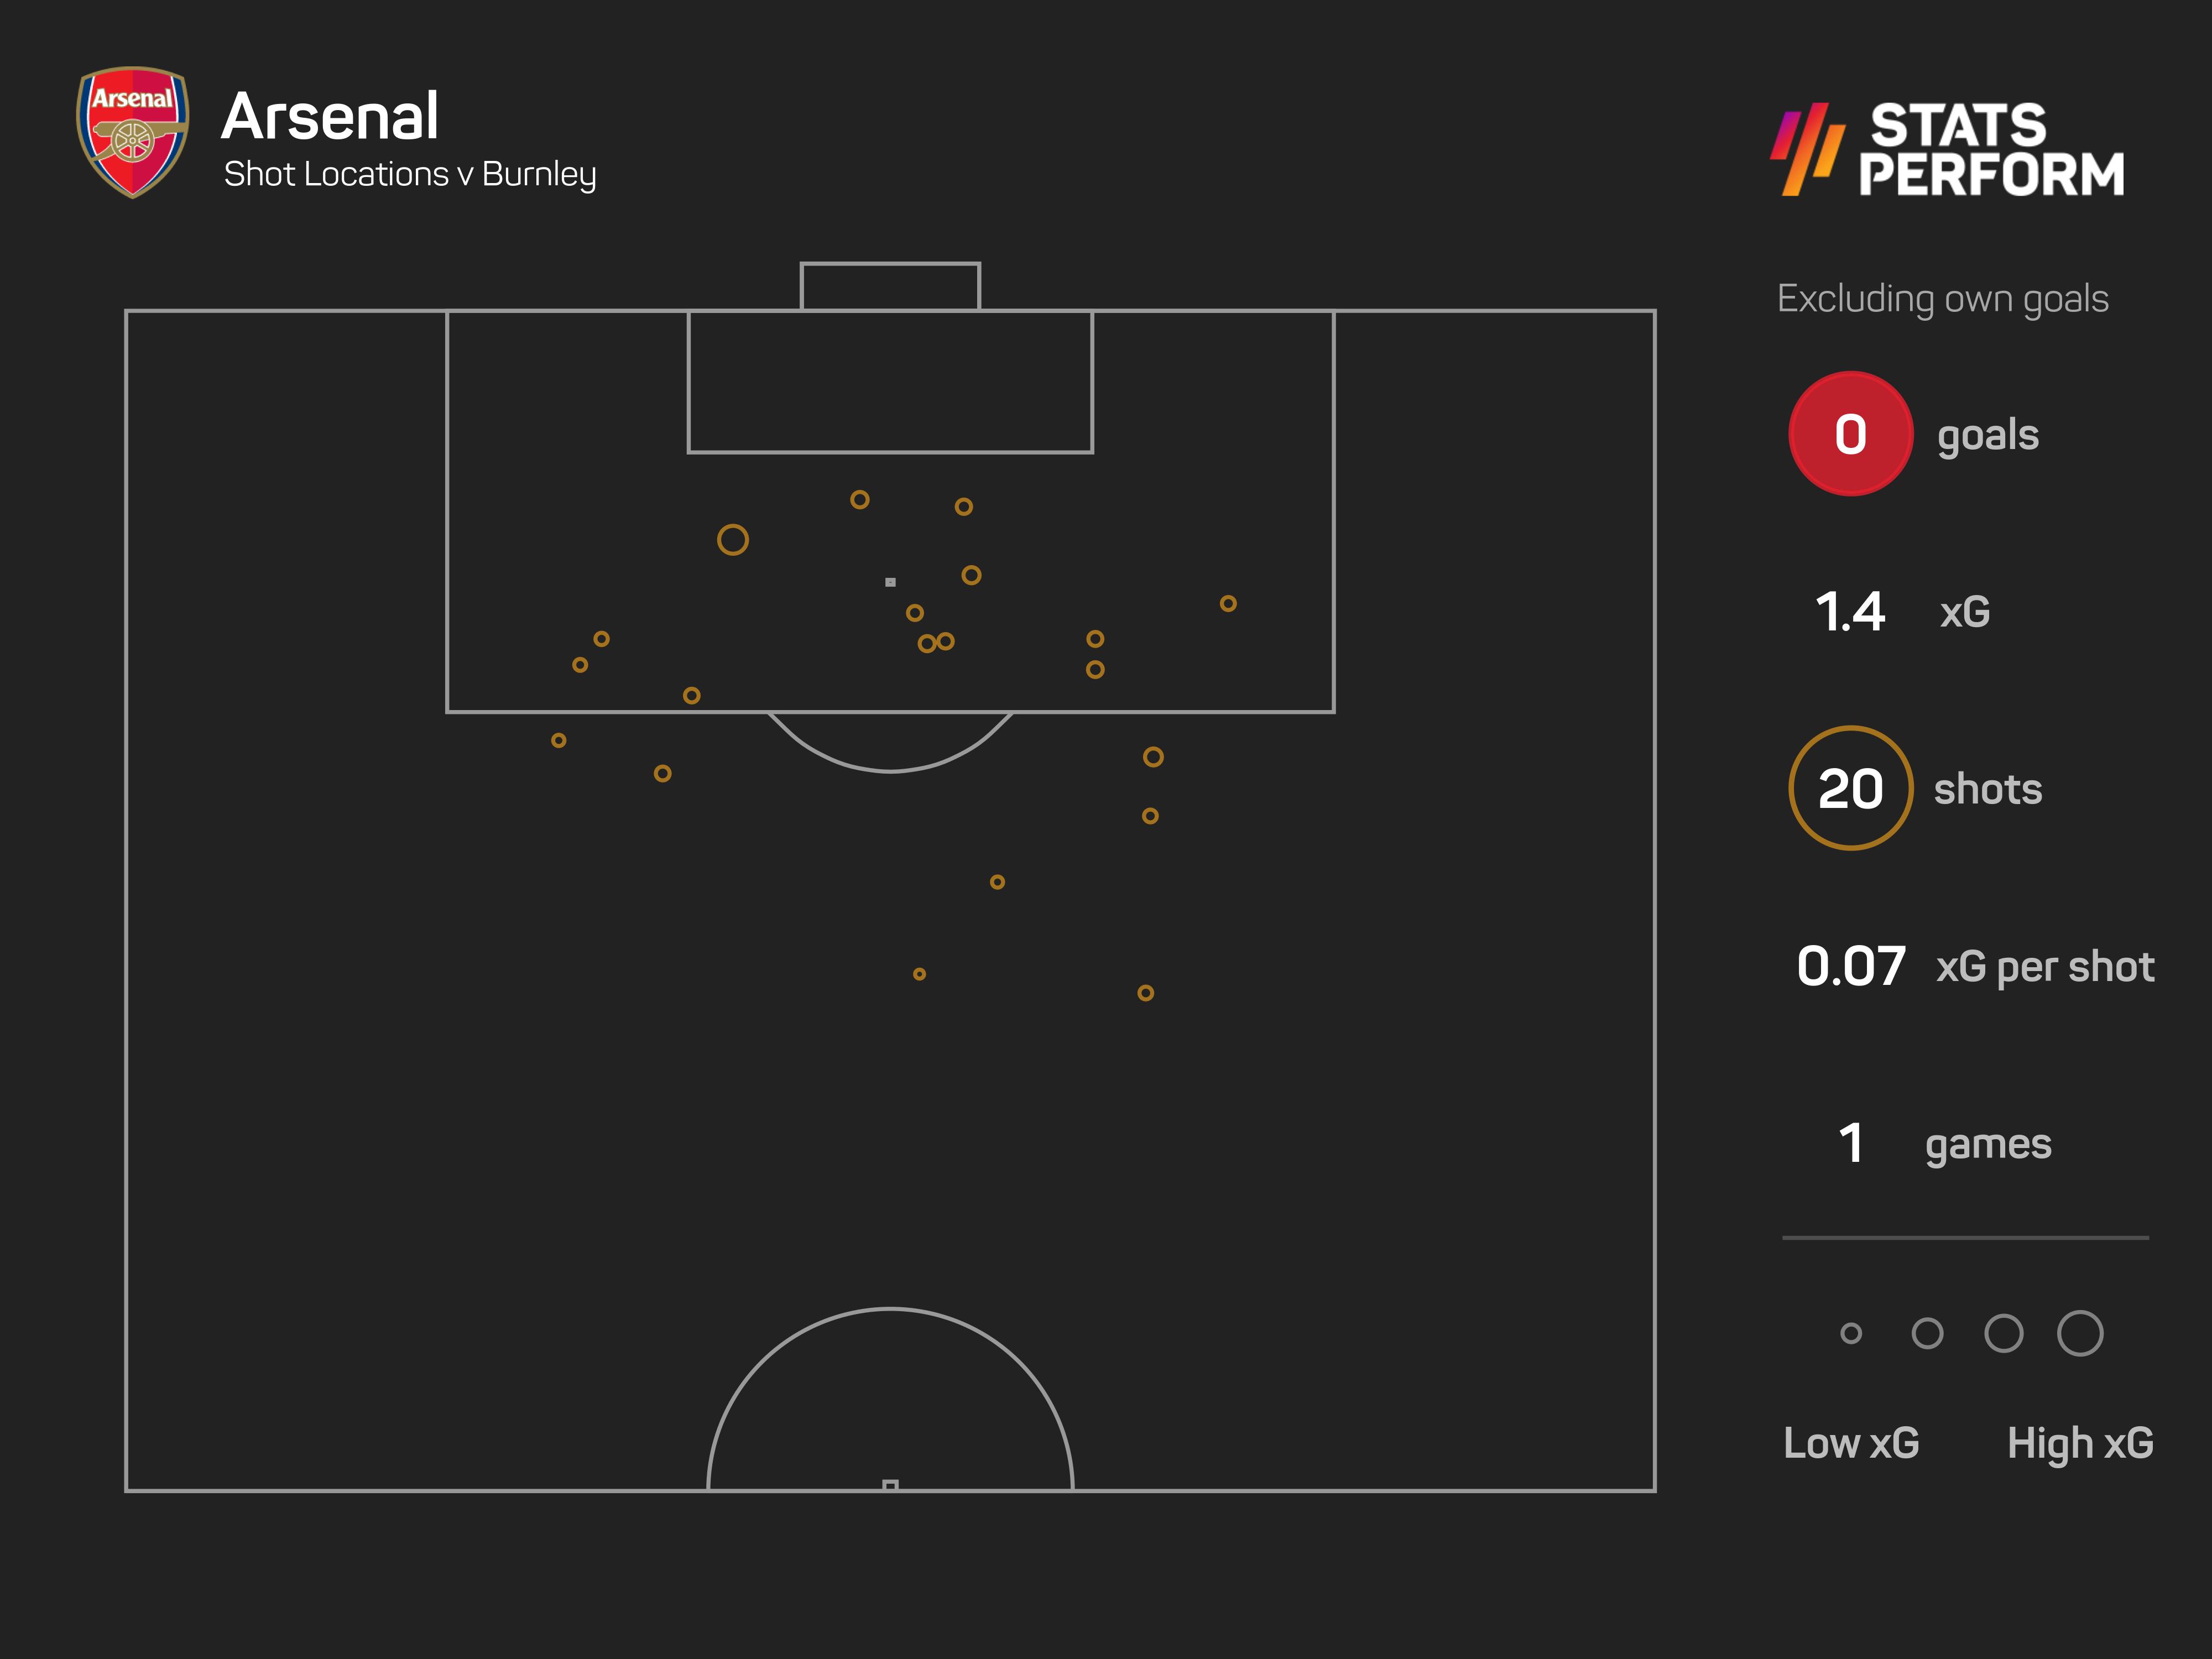 Arsenal had 20 attempts against Burnley, without success